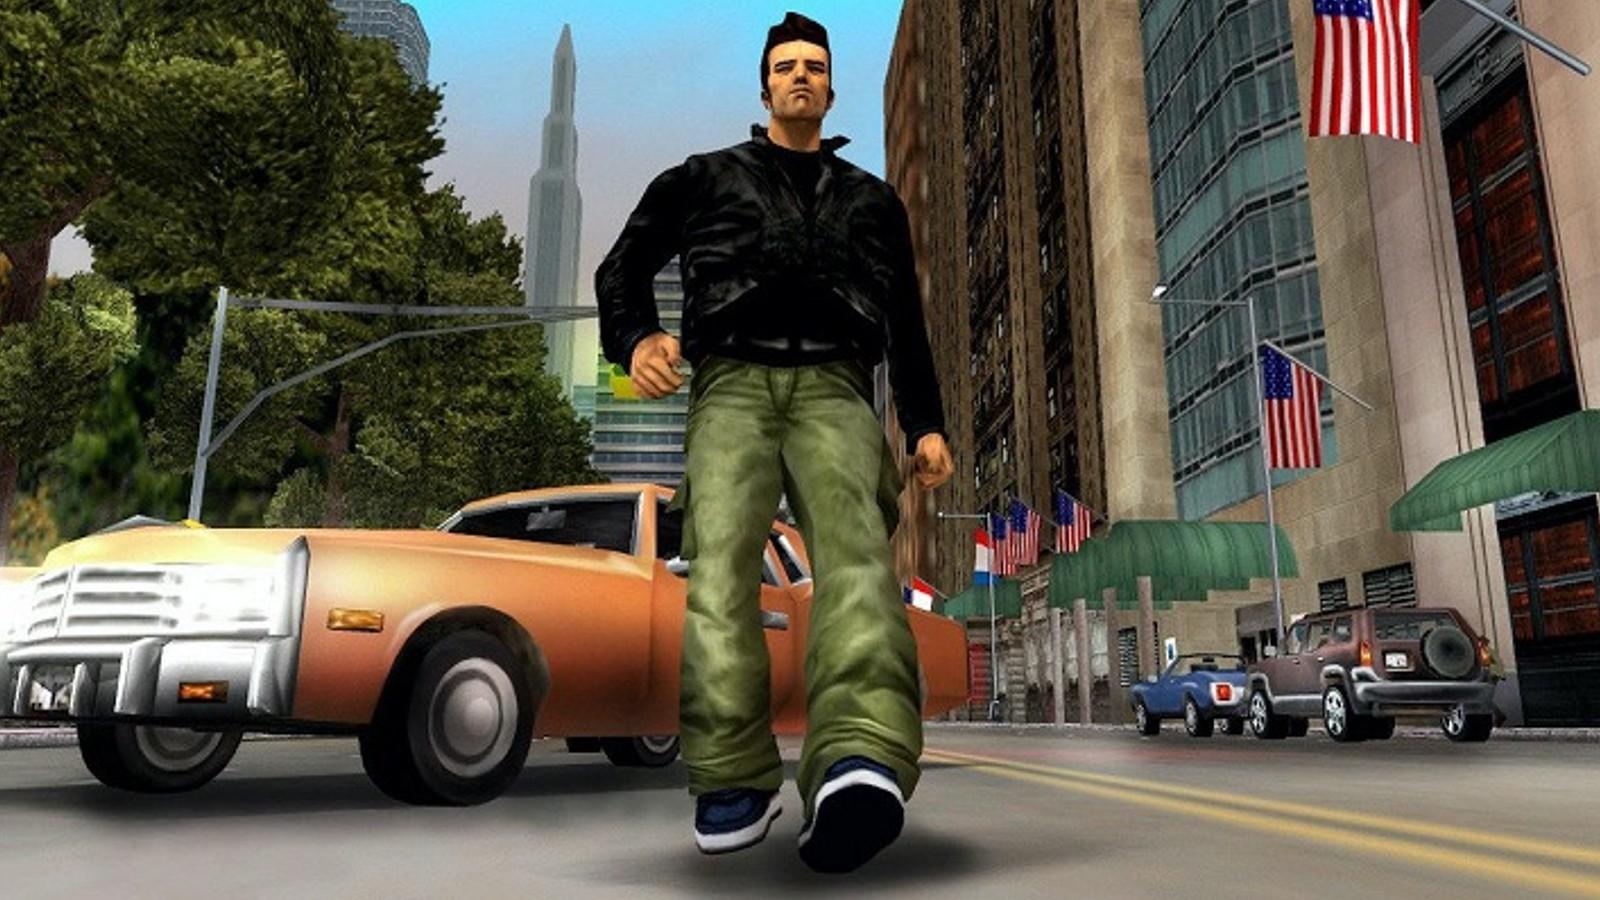 Grand Theft Auto III – The Definitive Edition Coming Soon - Epic